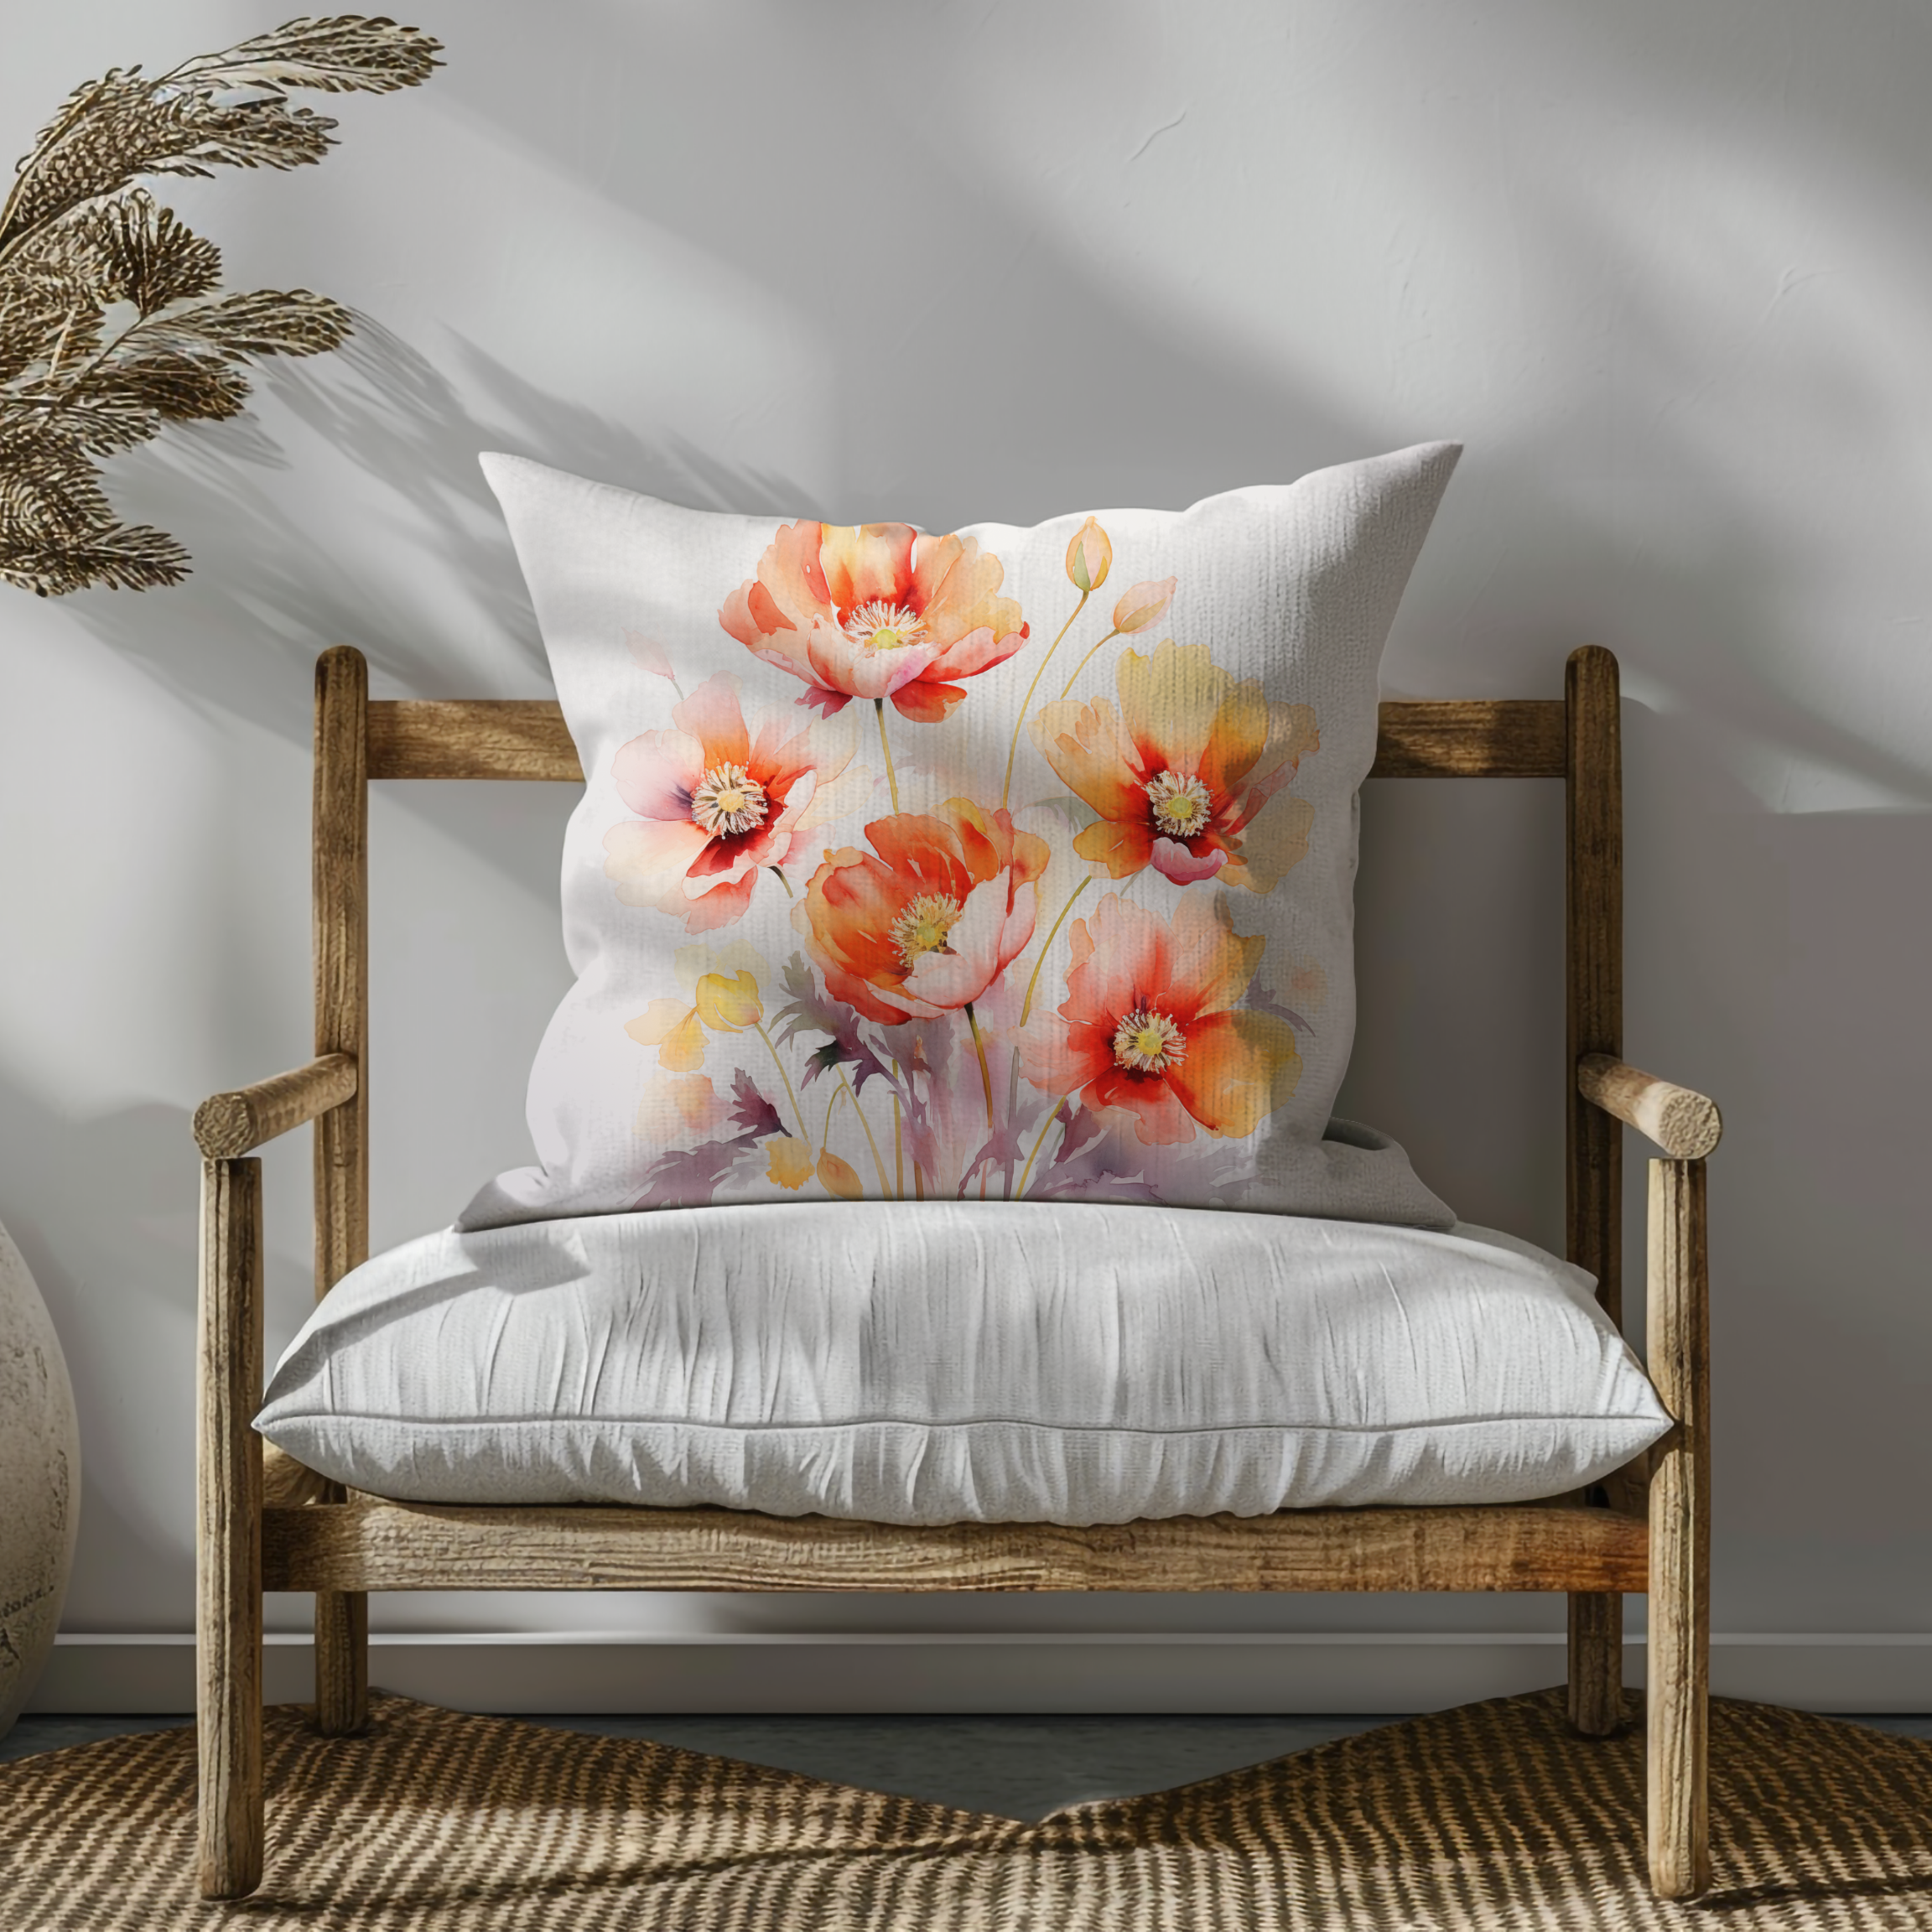 Sunset Blooms: Cozy Decorative Accent Pillow Cover